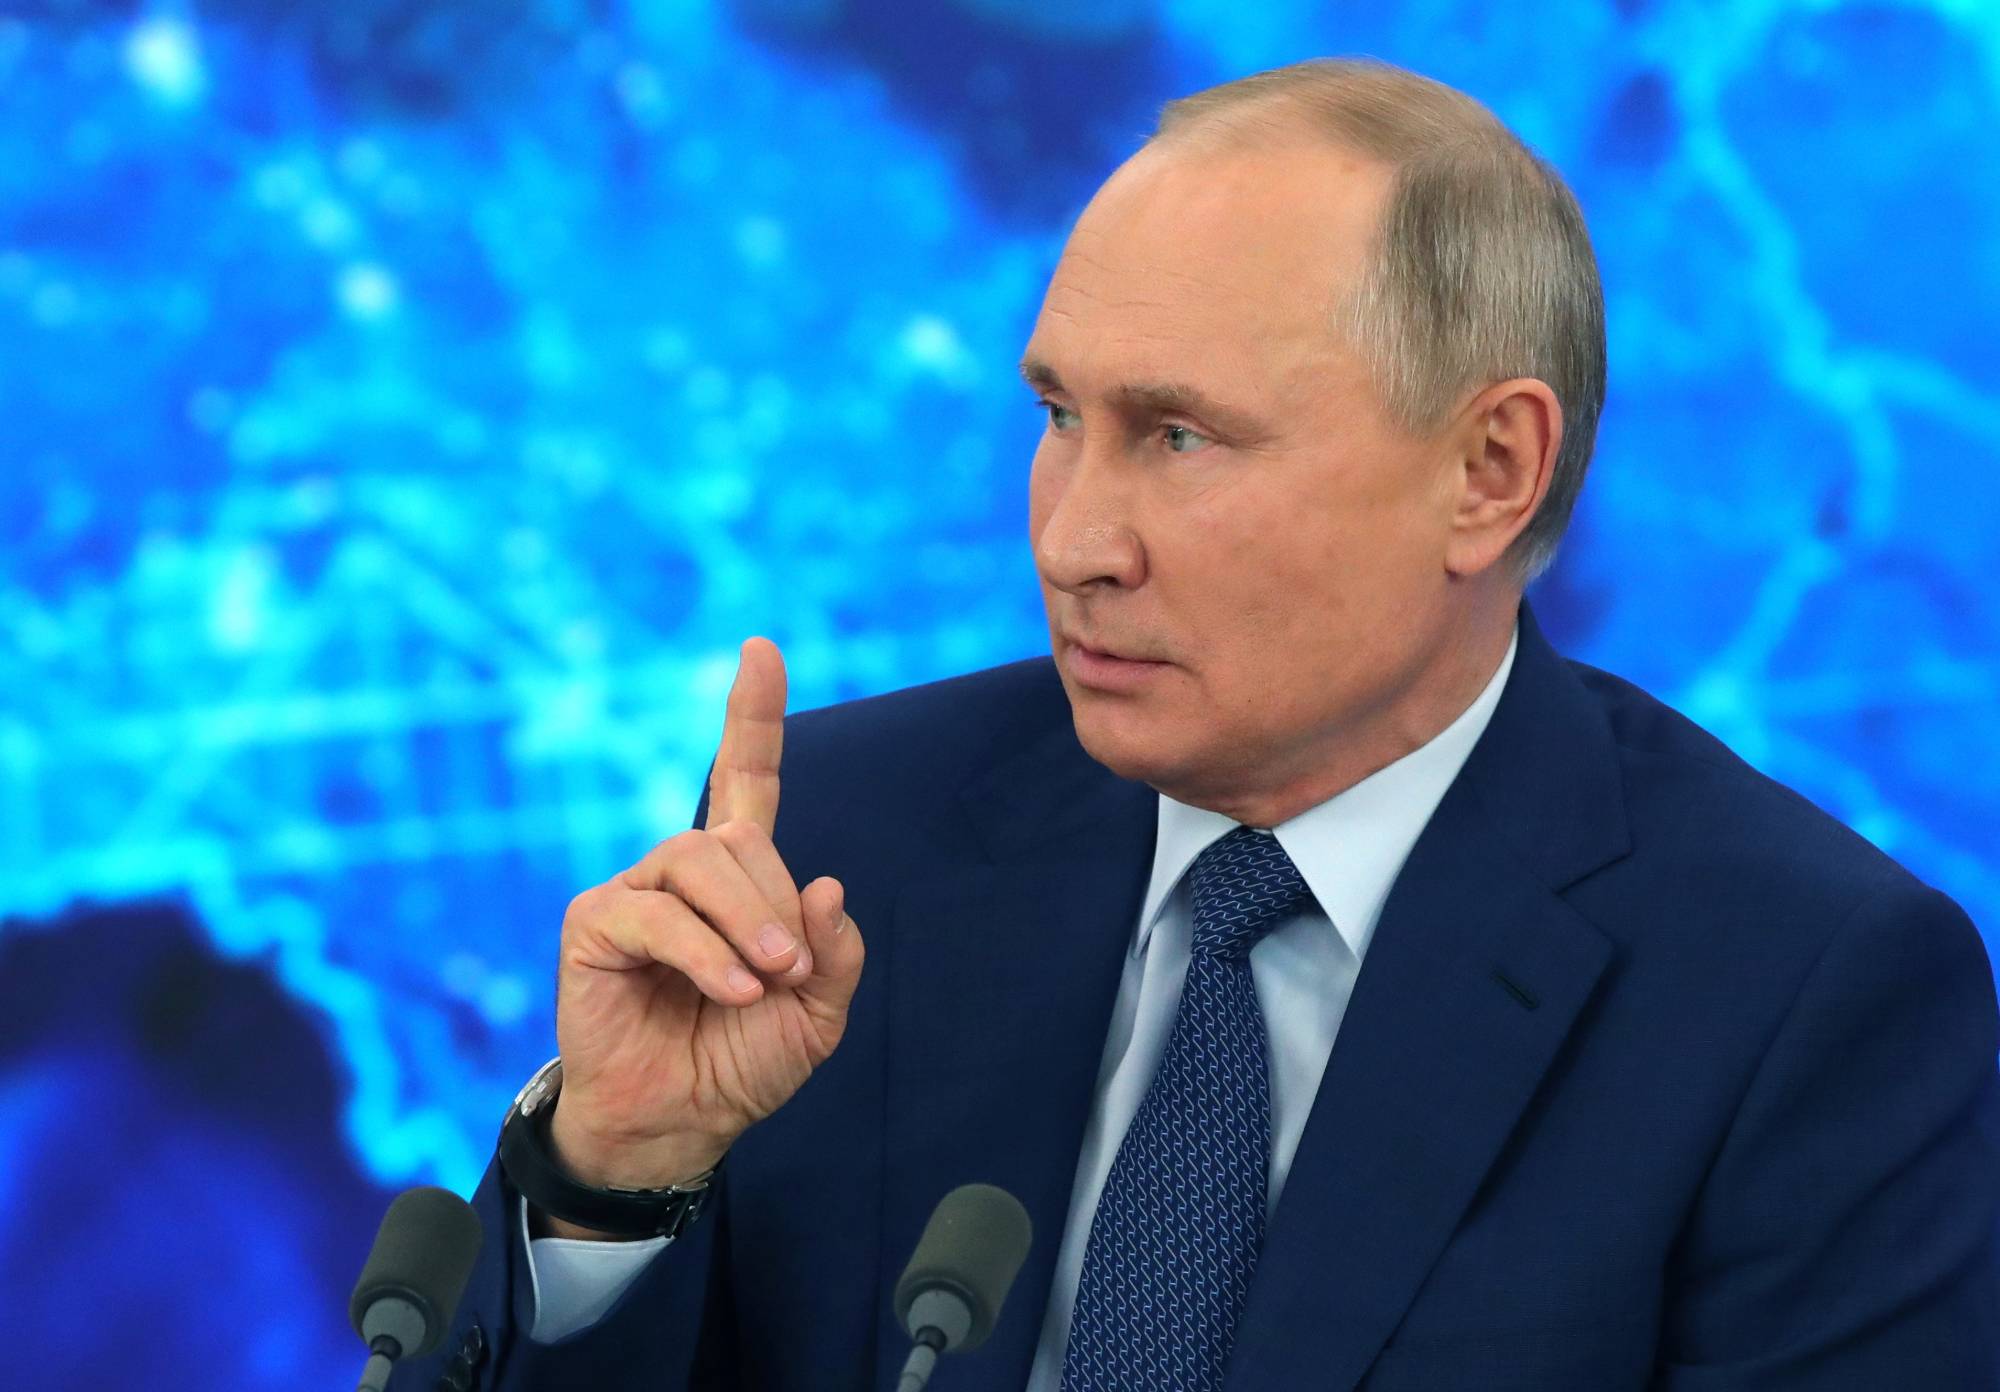 Russian President Vladimir Putin said last week that international actors must move on from Alexei Navalny, as they have failed to provide proof that he was poisoned.